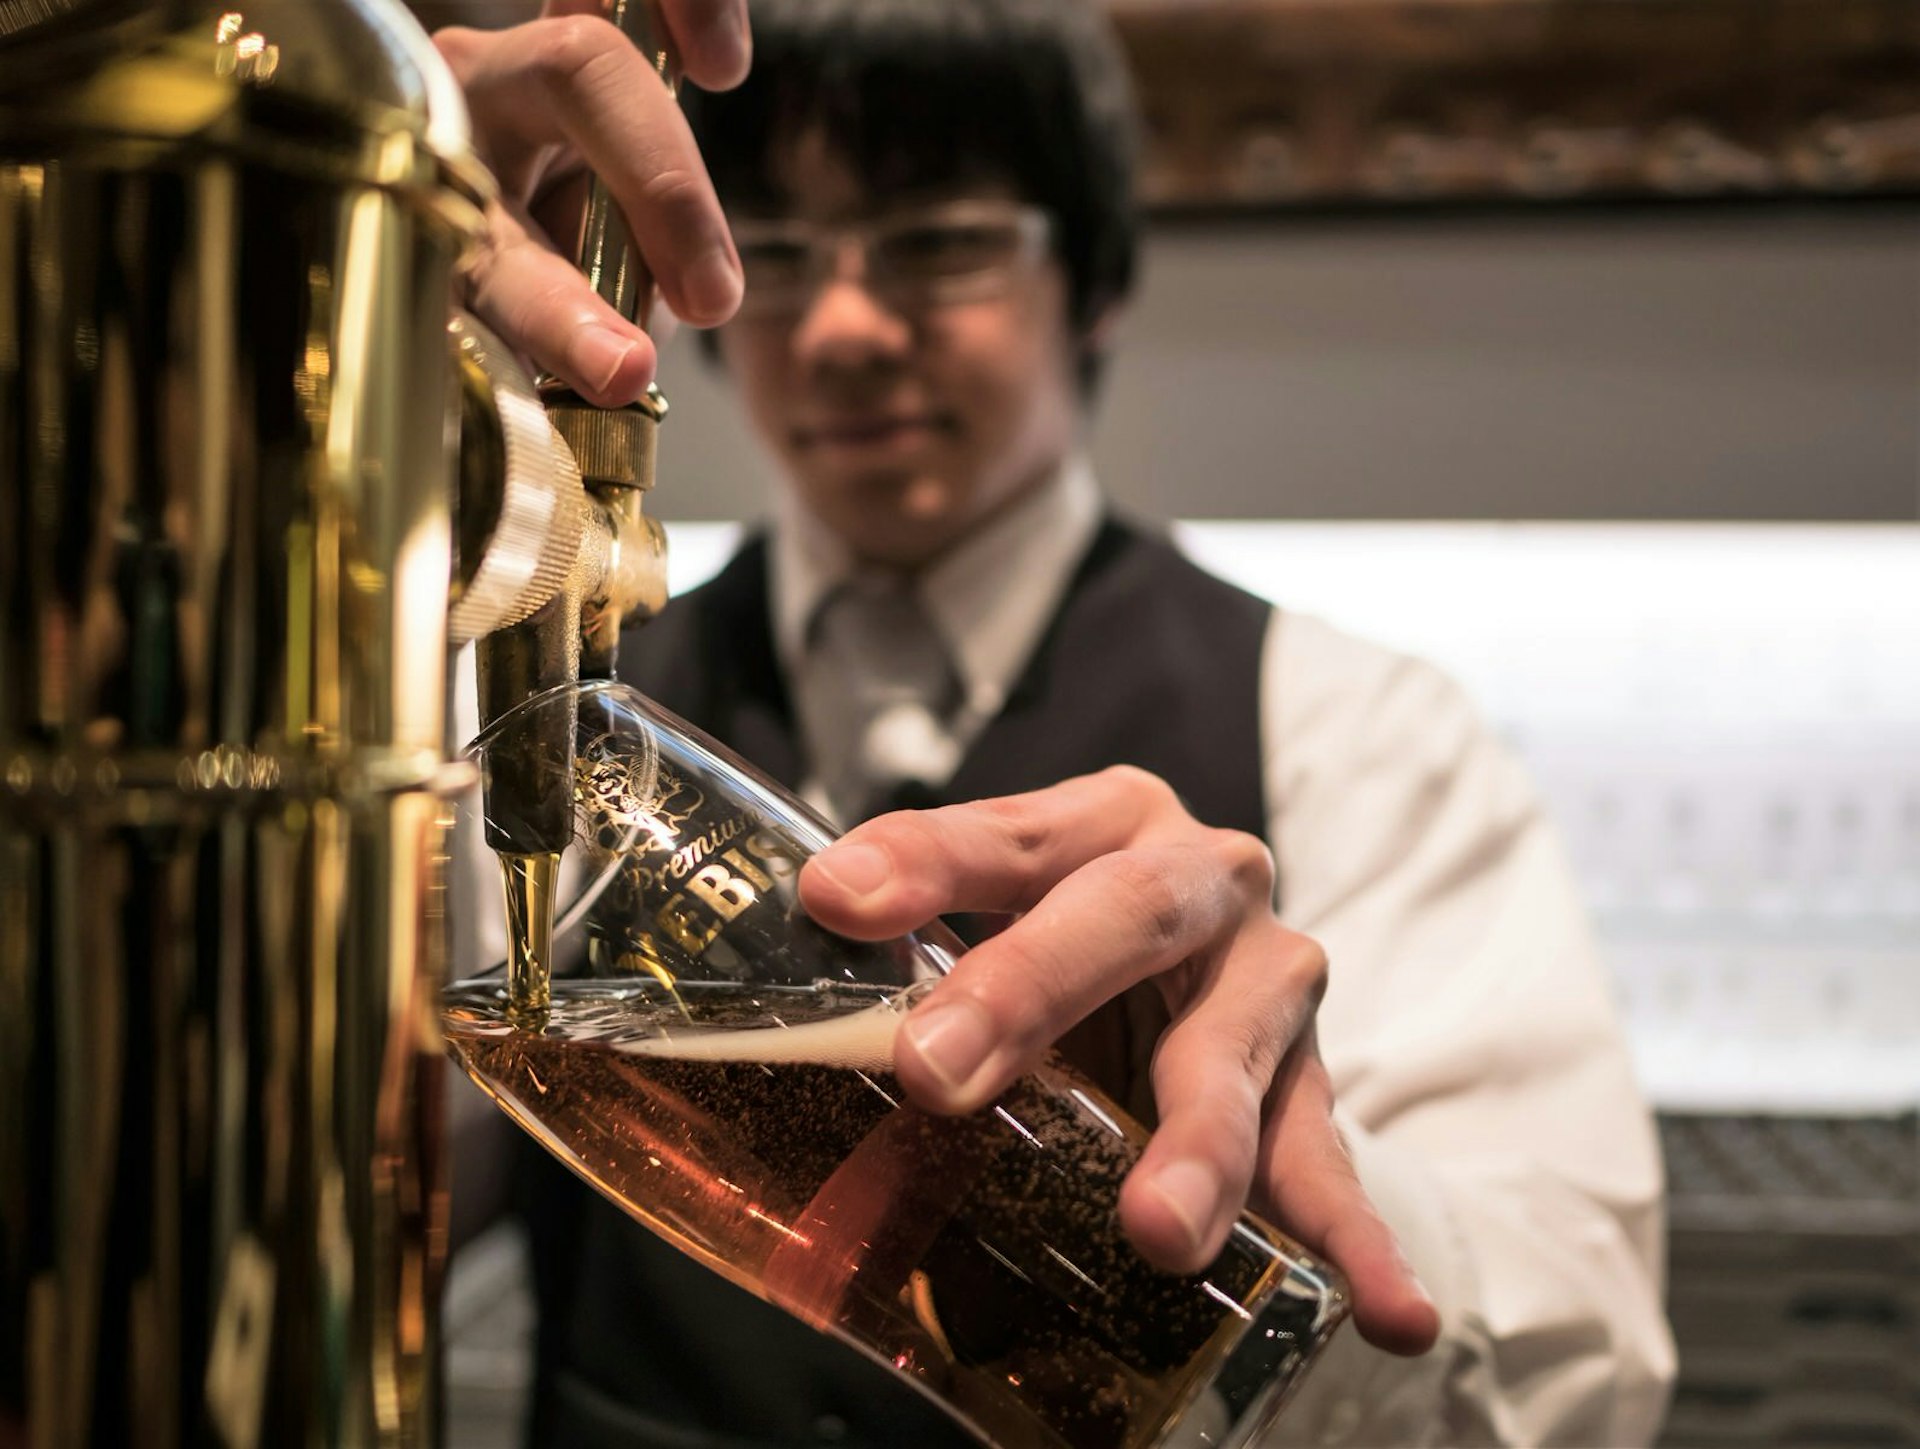 Close up of a glass with the Yebisu logo as beer is being poured into it at Beer Museum Yebisu in Tokyo © karanik yimpat / Shutterstock